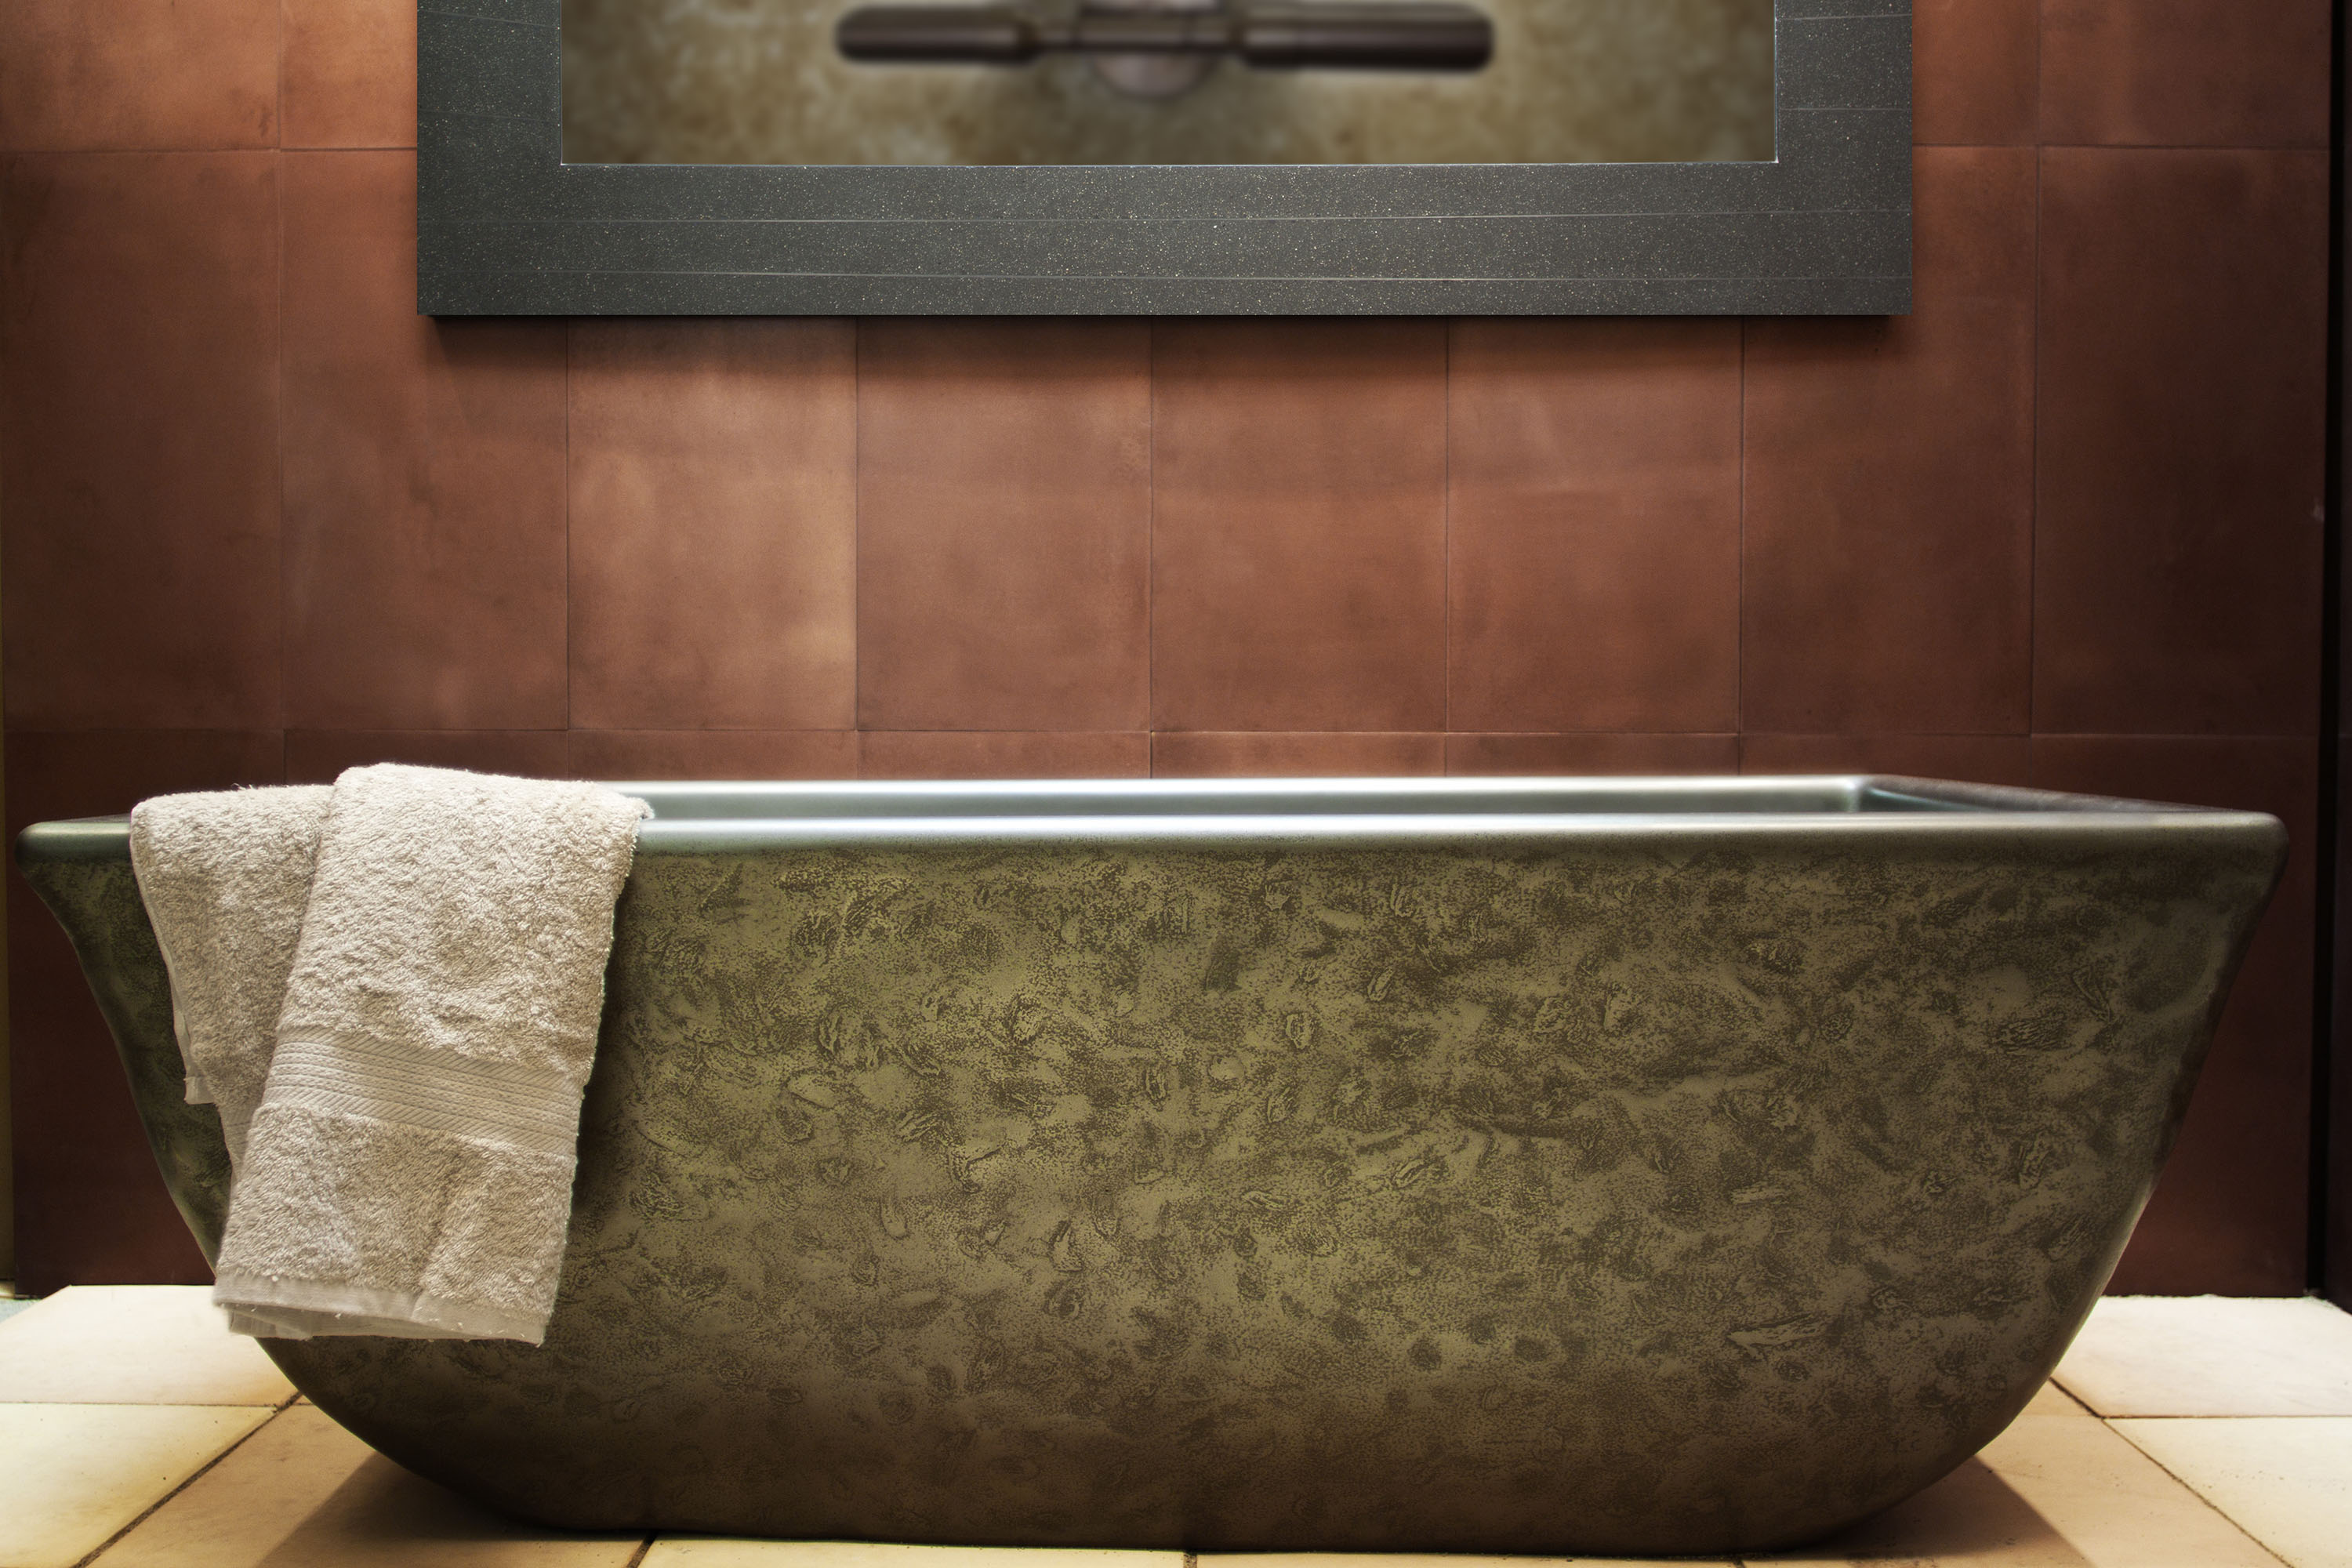 The Indulge Concrete Soaking Tub, MetalCrete Pewter Finish (Exterior Only) with Copper MetalCrete Pewter Cladding